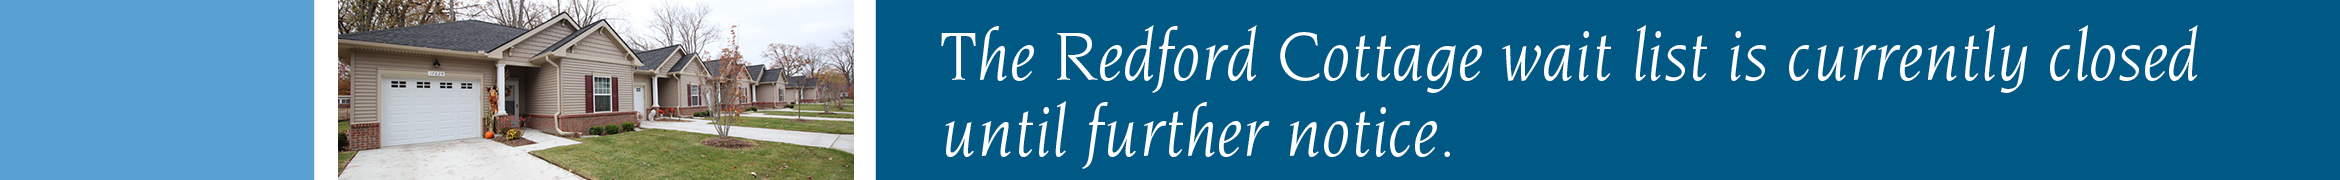 Cottages at Redford Banner Ad